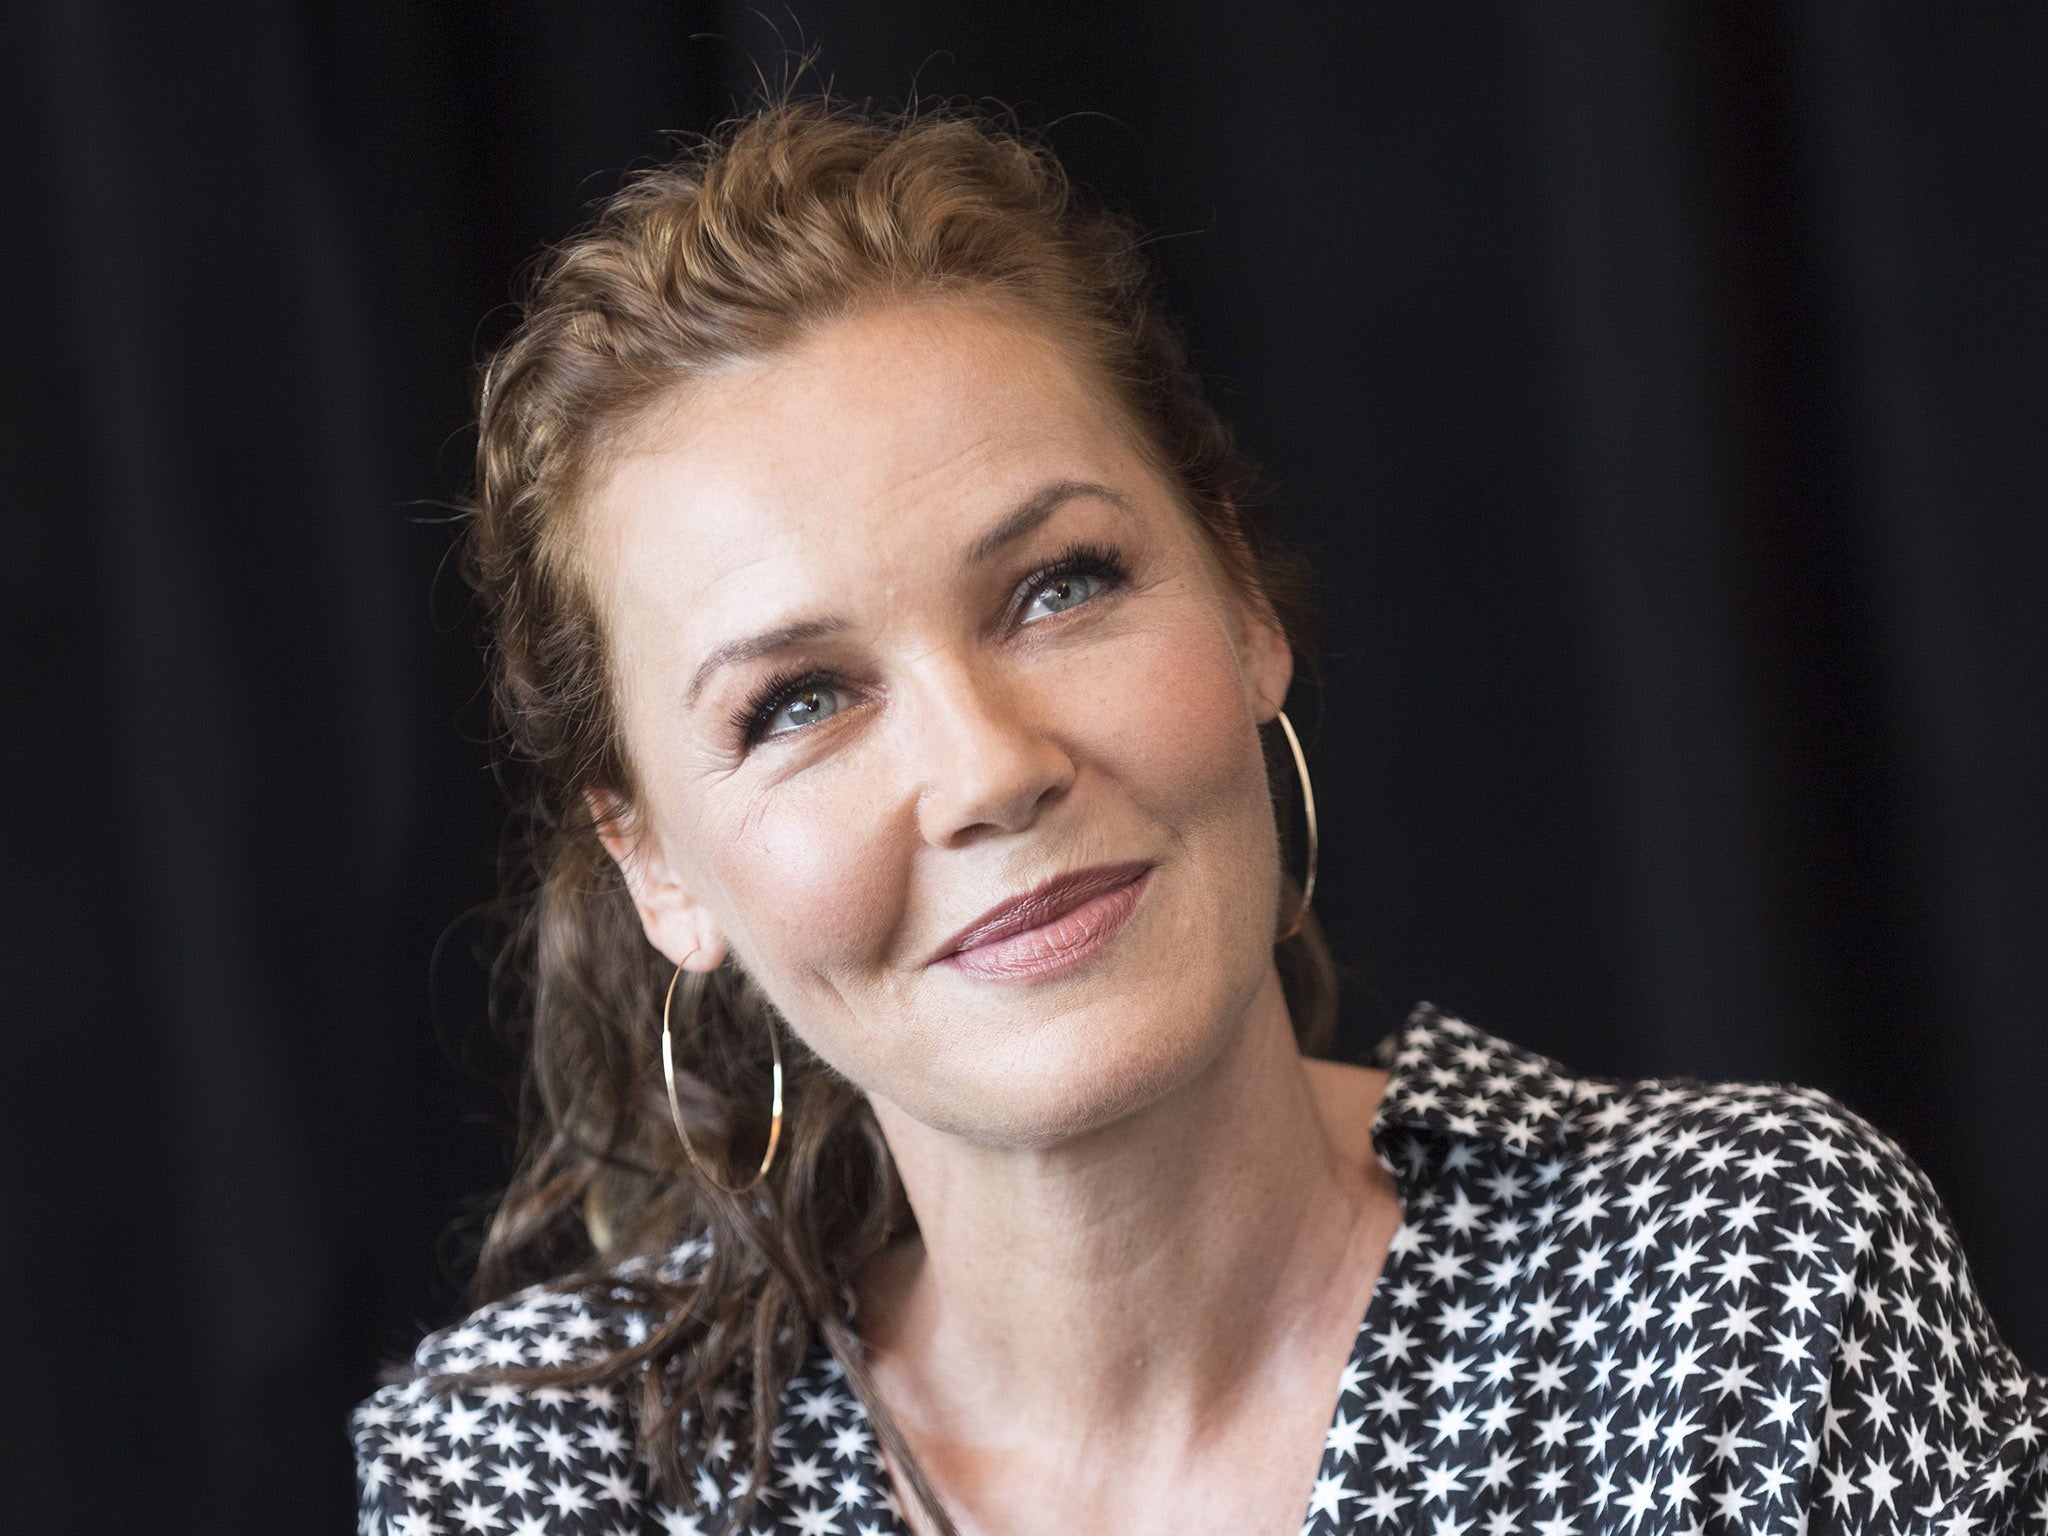 Connie Nielsen interview Ive been the token woman in so many films